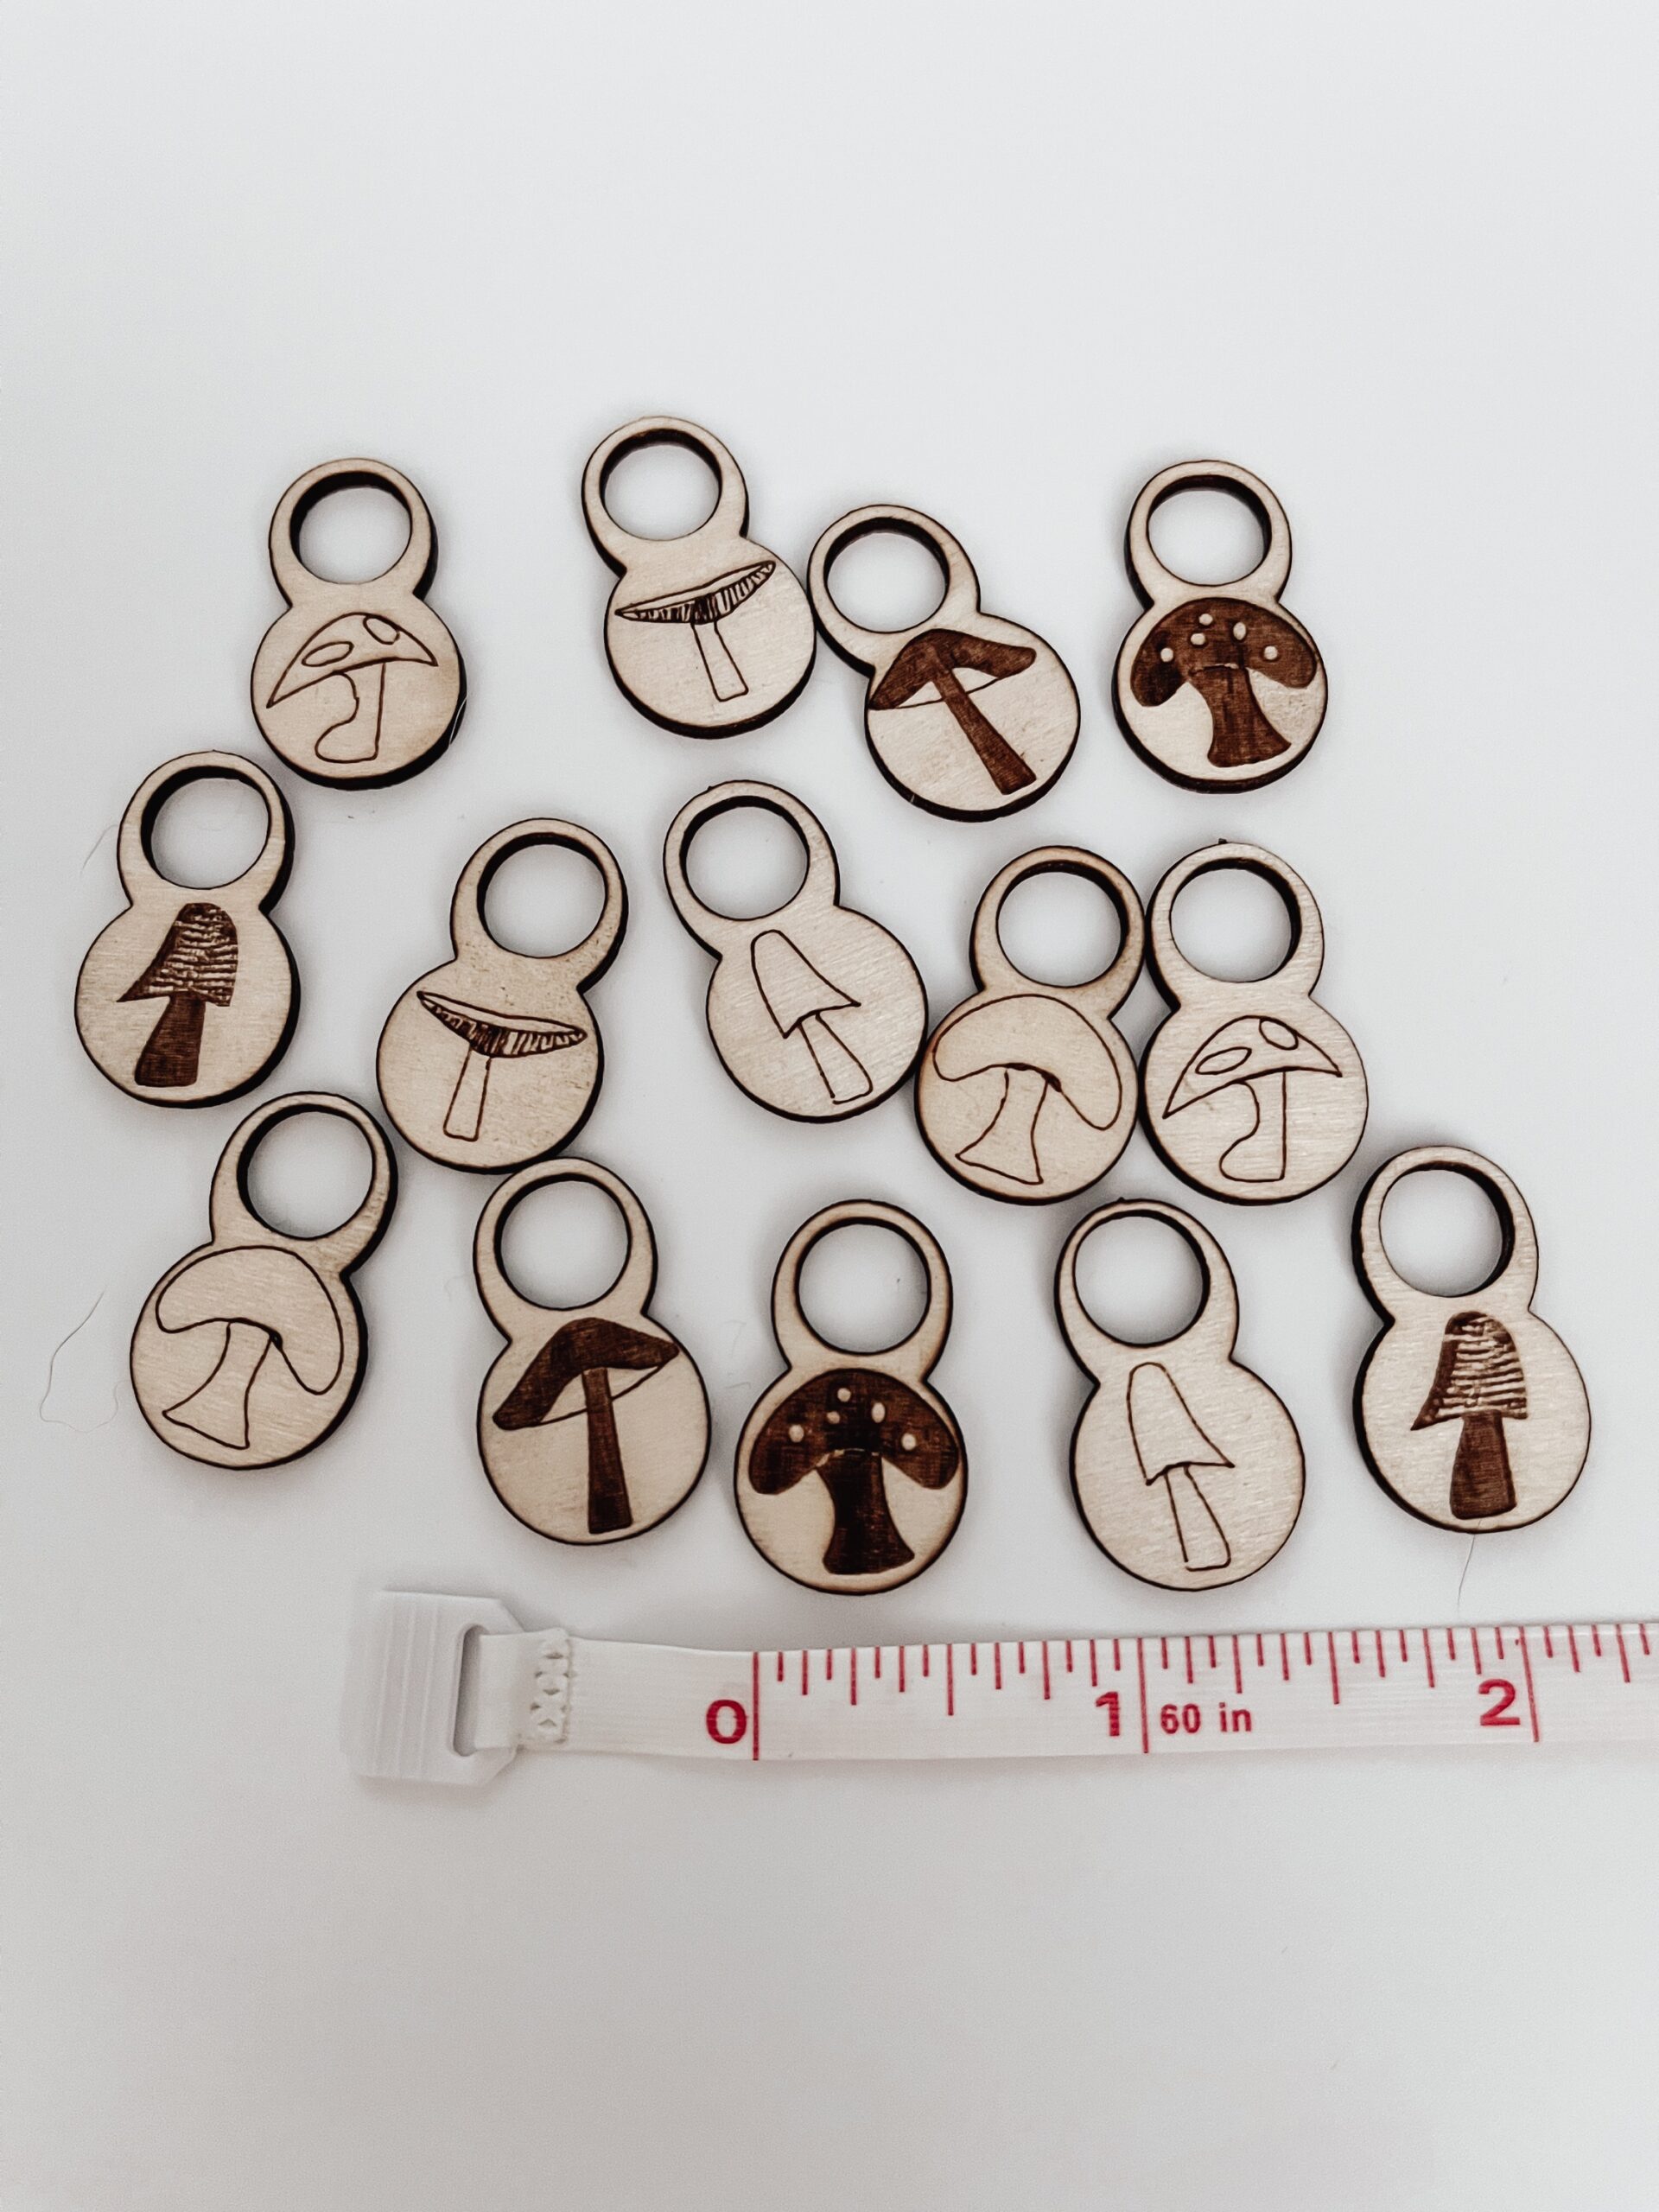 A total of 14 wood stitch markers with a variety of hand-drawn mushroom designs are displayed on a white background. next to a measuring tape showing they're approximately 1/2" wide